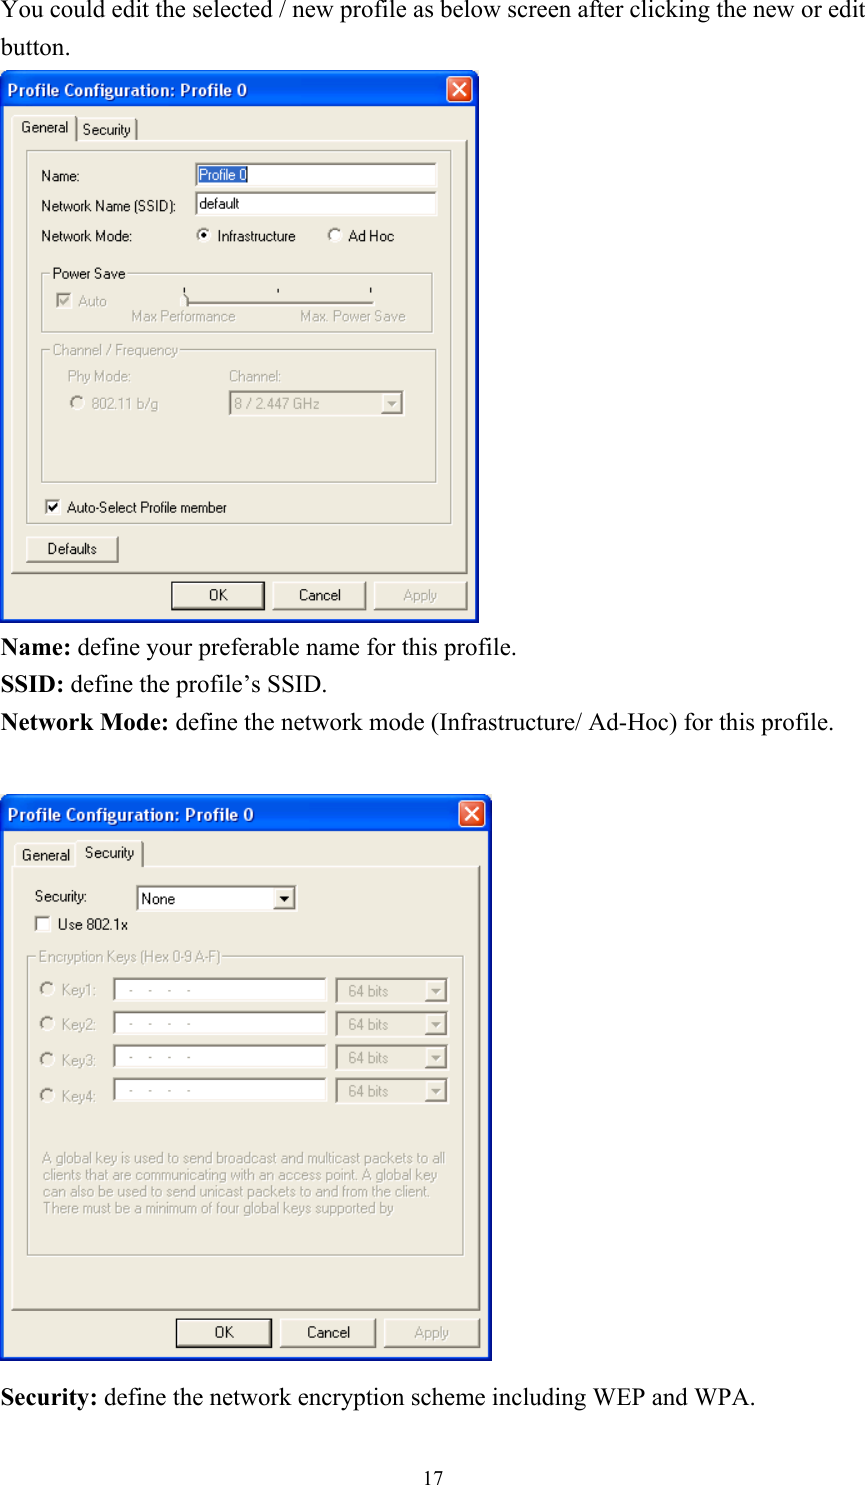 You could edit the selected / new profile as below screen after clicking the new or edit button.  Name: define your preferable name for this profile. SSID: define the profile’s SSID. Network Mode: define the network mode (Infrastructure/ Ad-Hoc) for this profile.   Security: define the network encryption scheme including WEP and WPA.  17